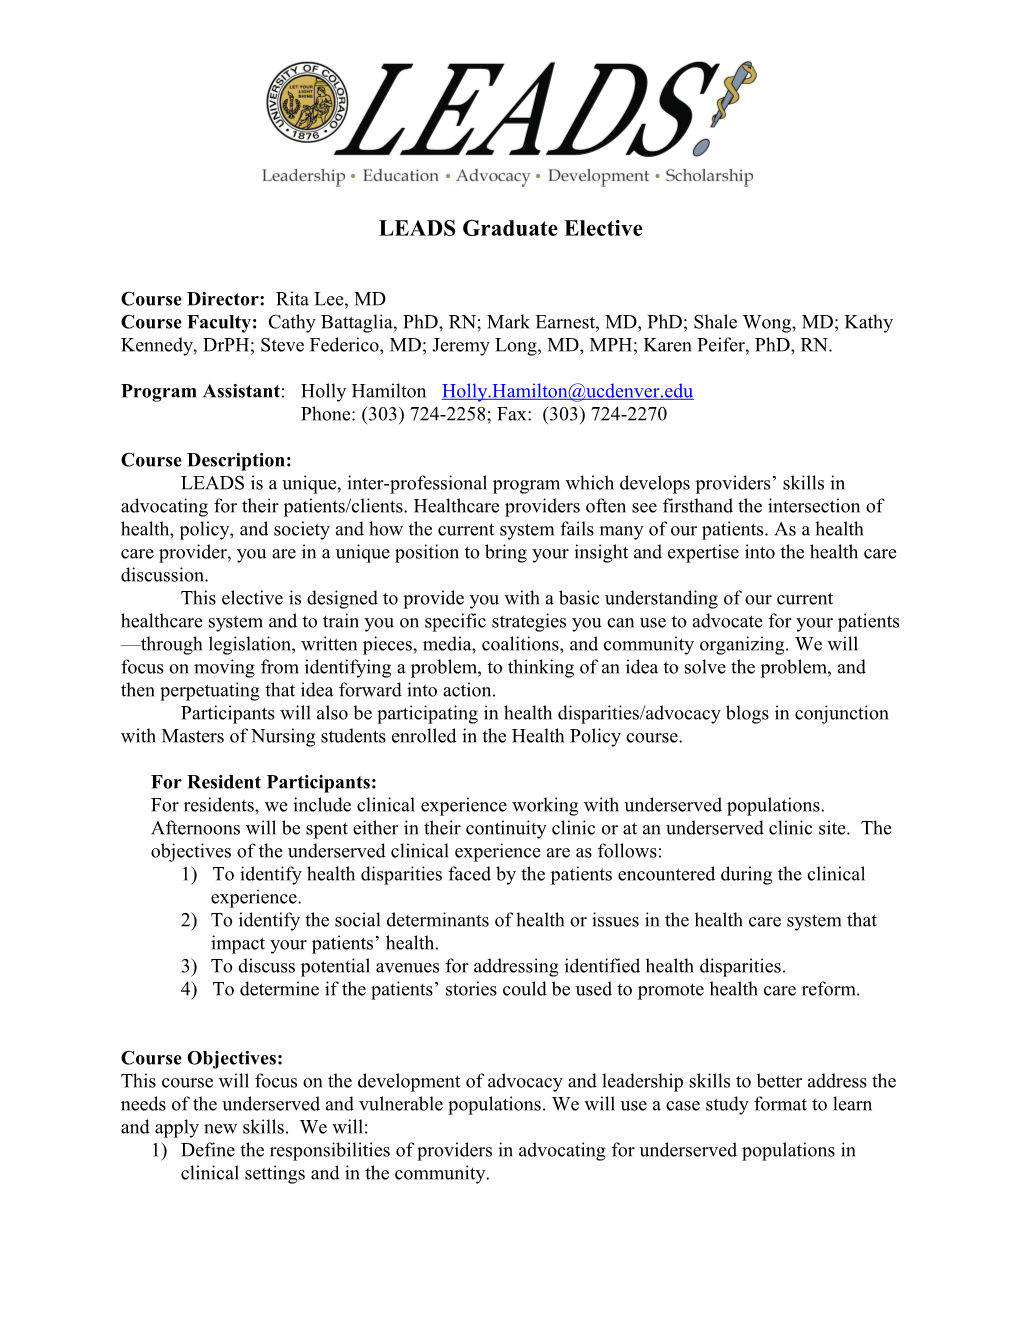 CU-LEADS Resident Advocacy Elective